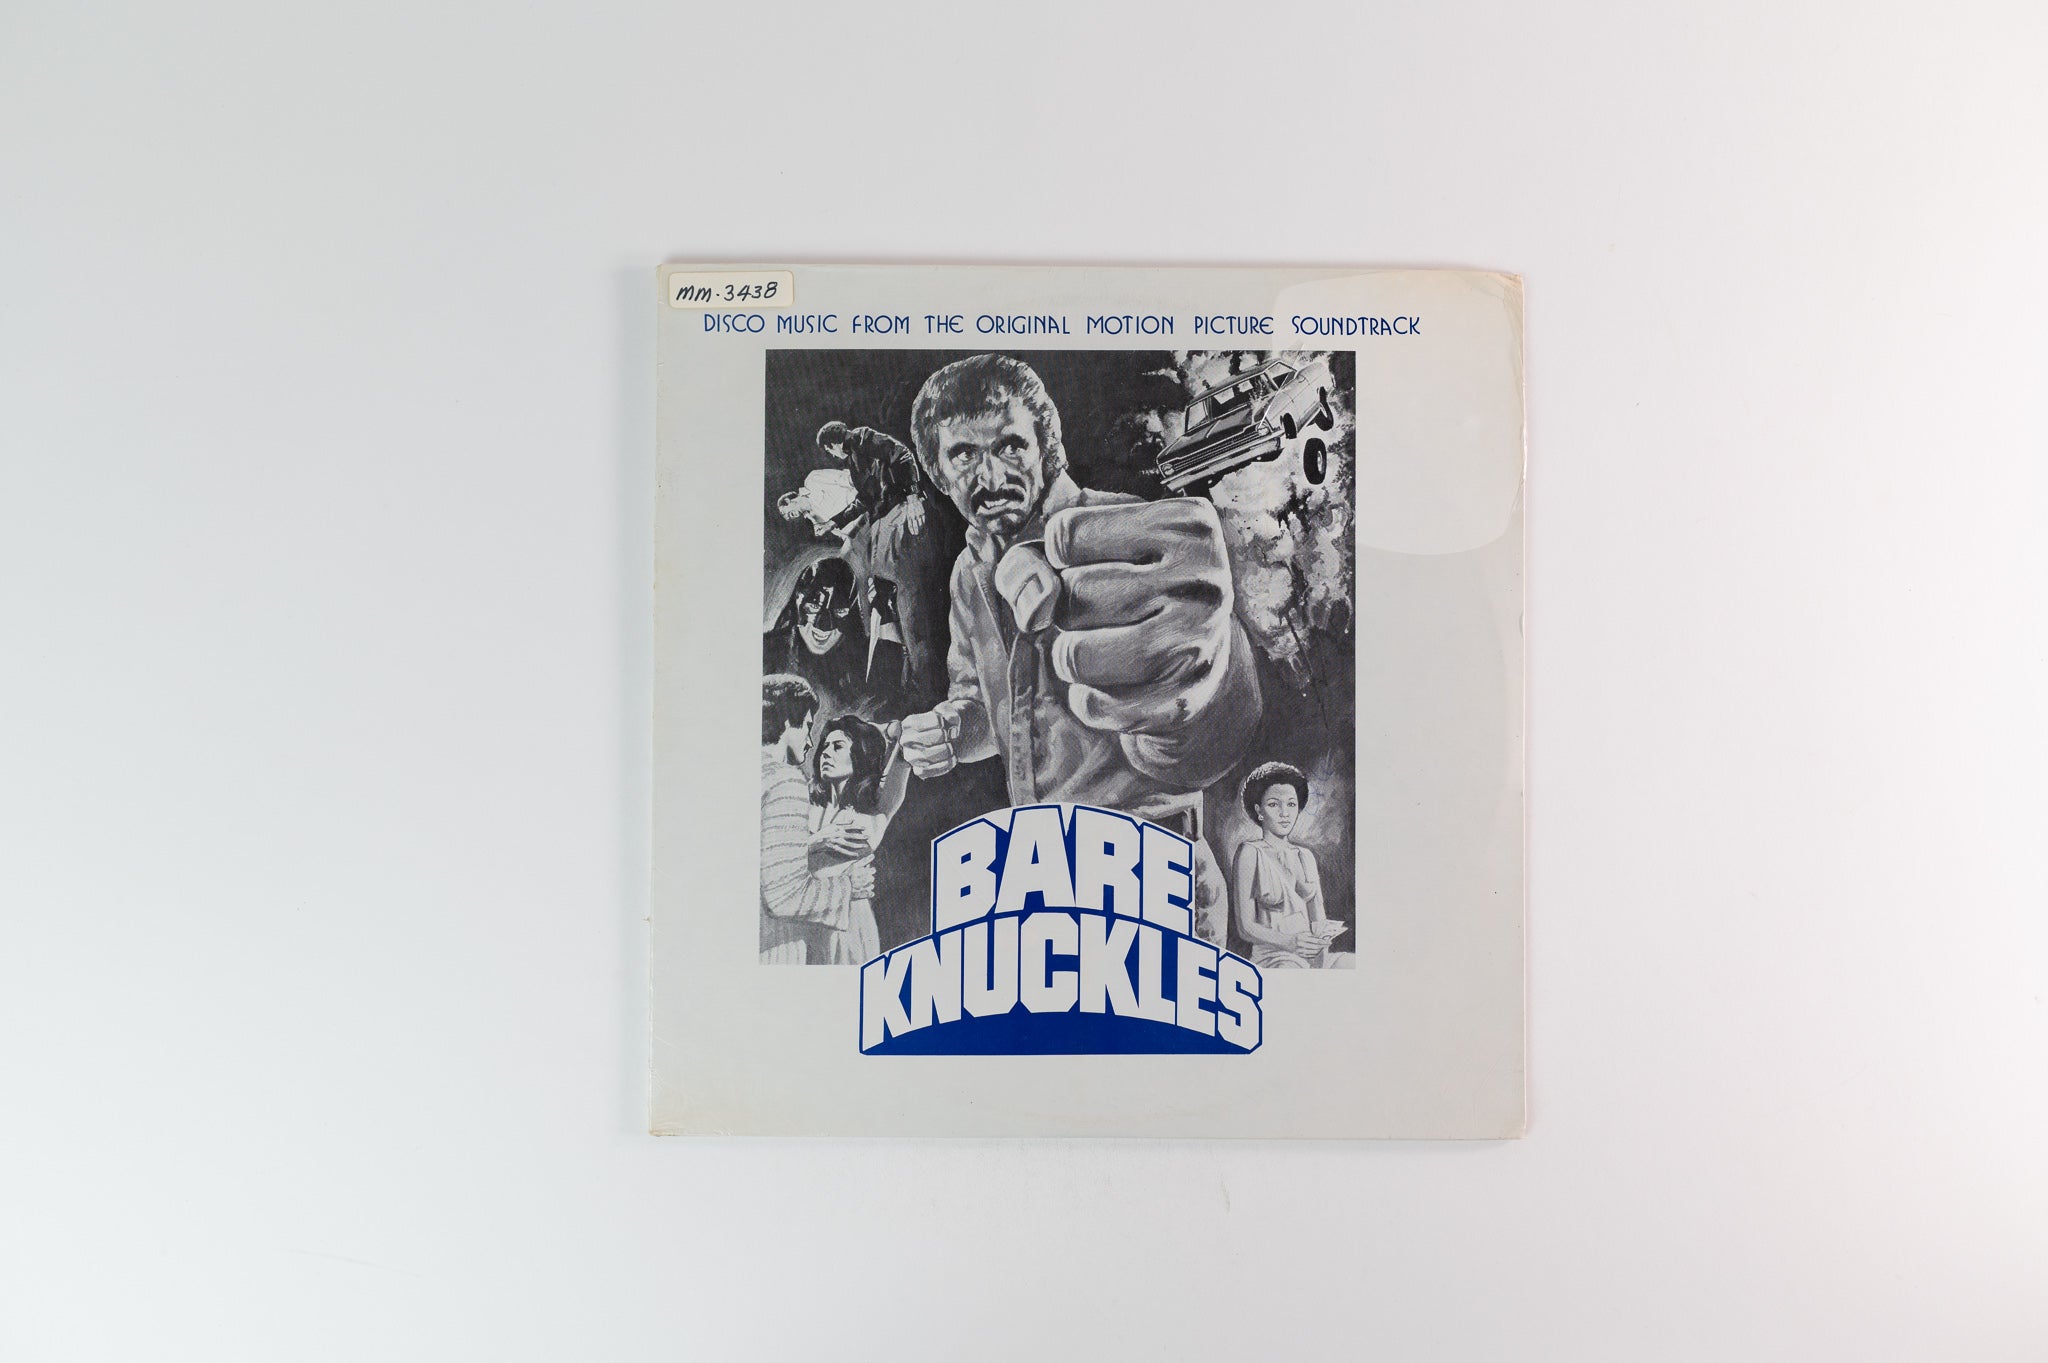 Vic Caesar - Bare Knuckles (Disco Music From The Original Motion Picture Soundtrack) on Gucci Sealed